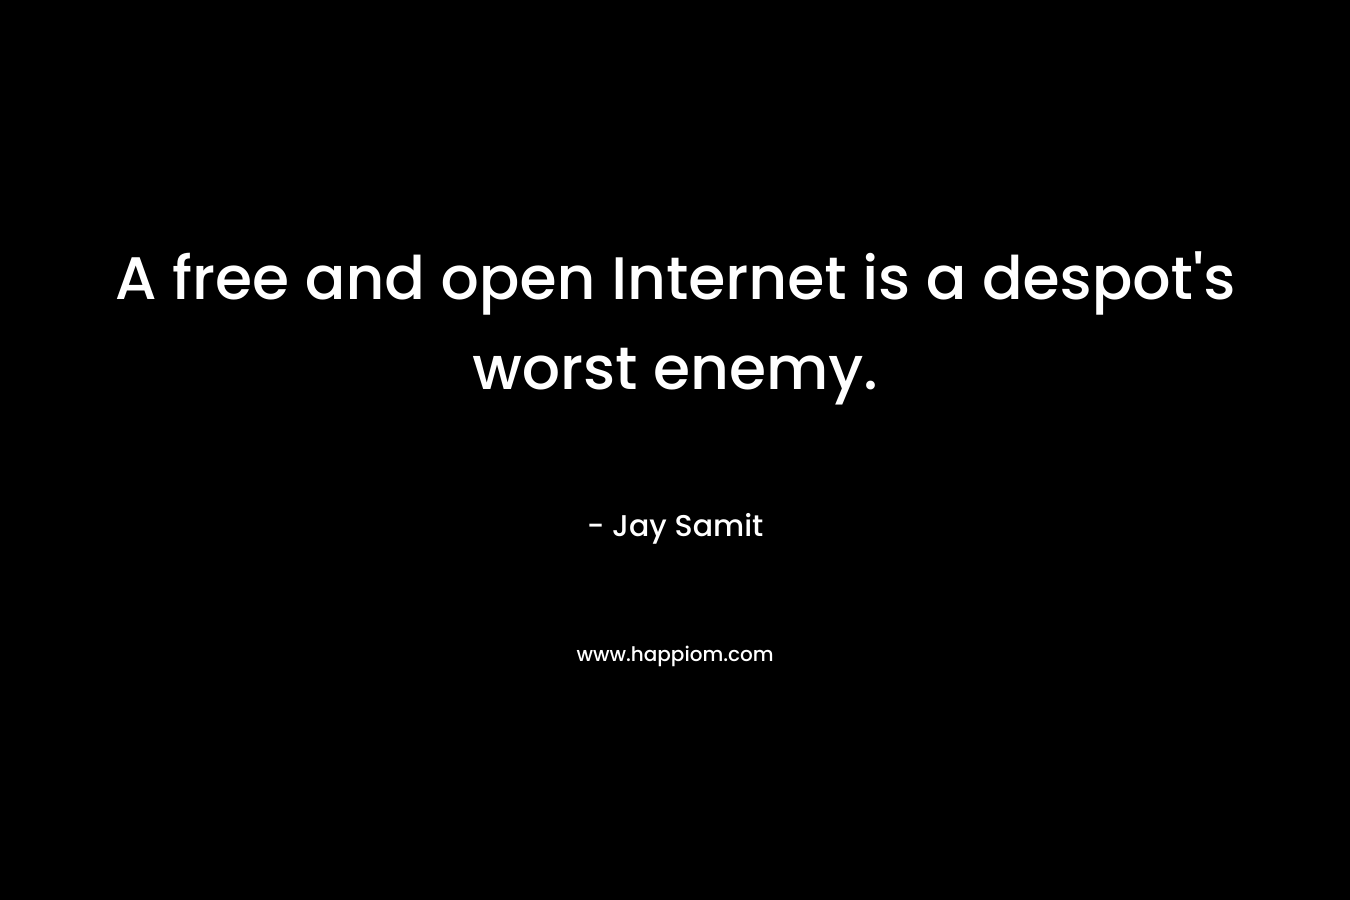 A free and open Internet is a despot's worst enemy.